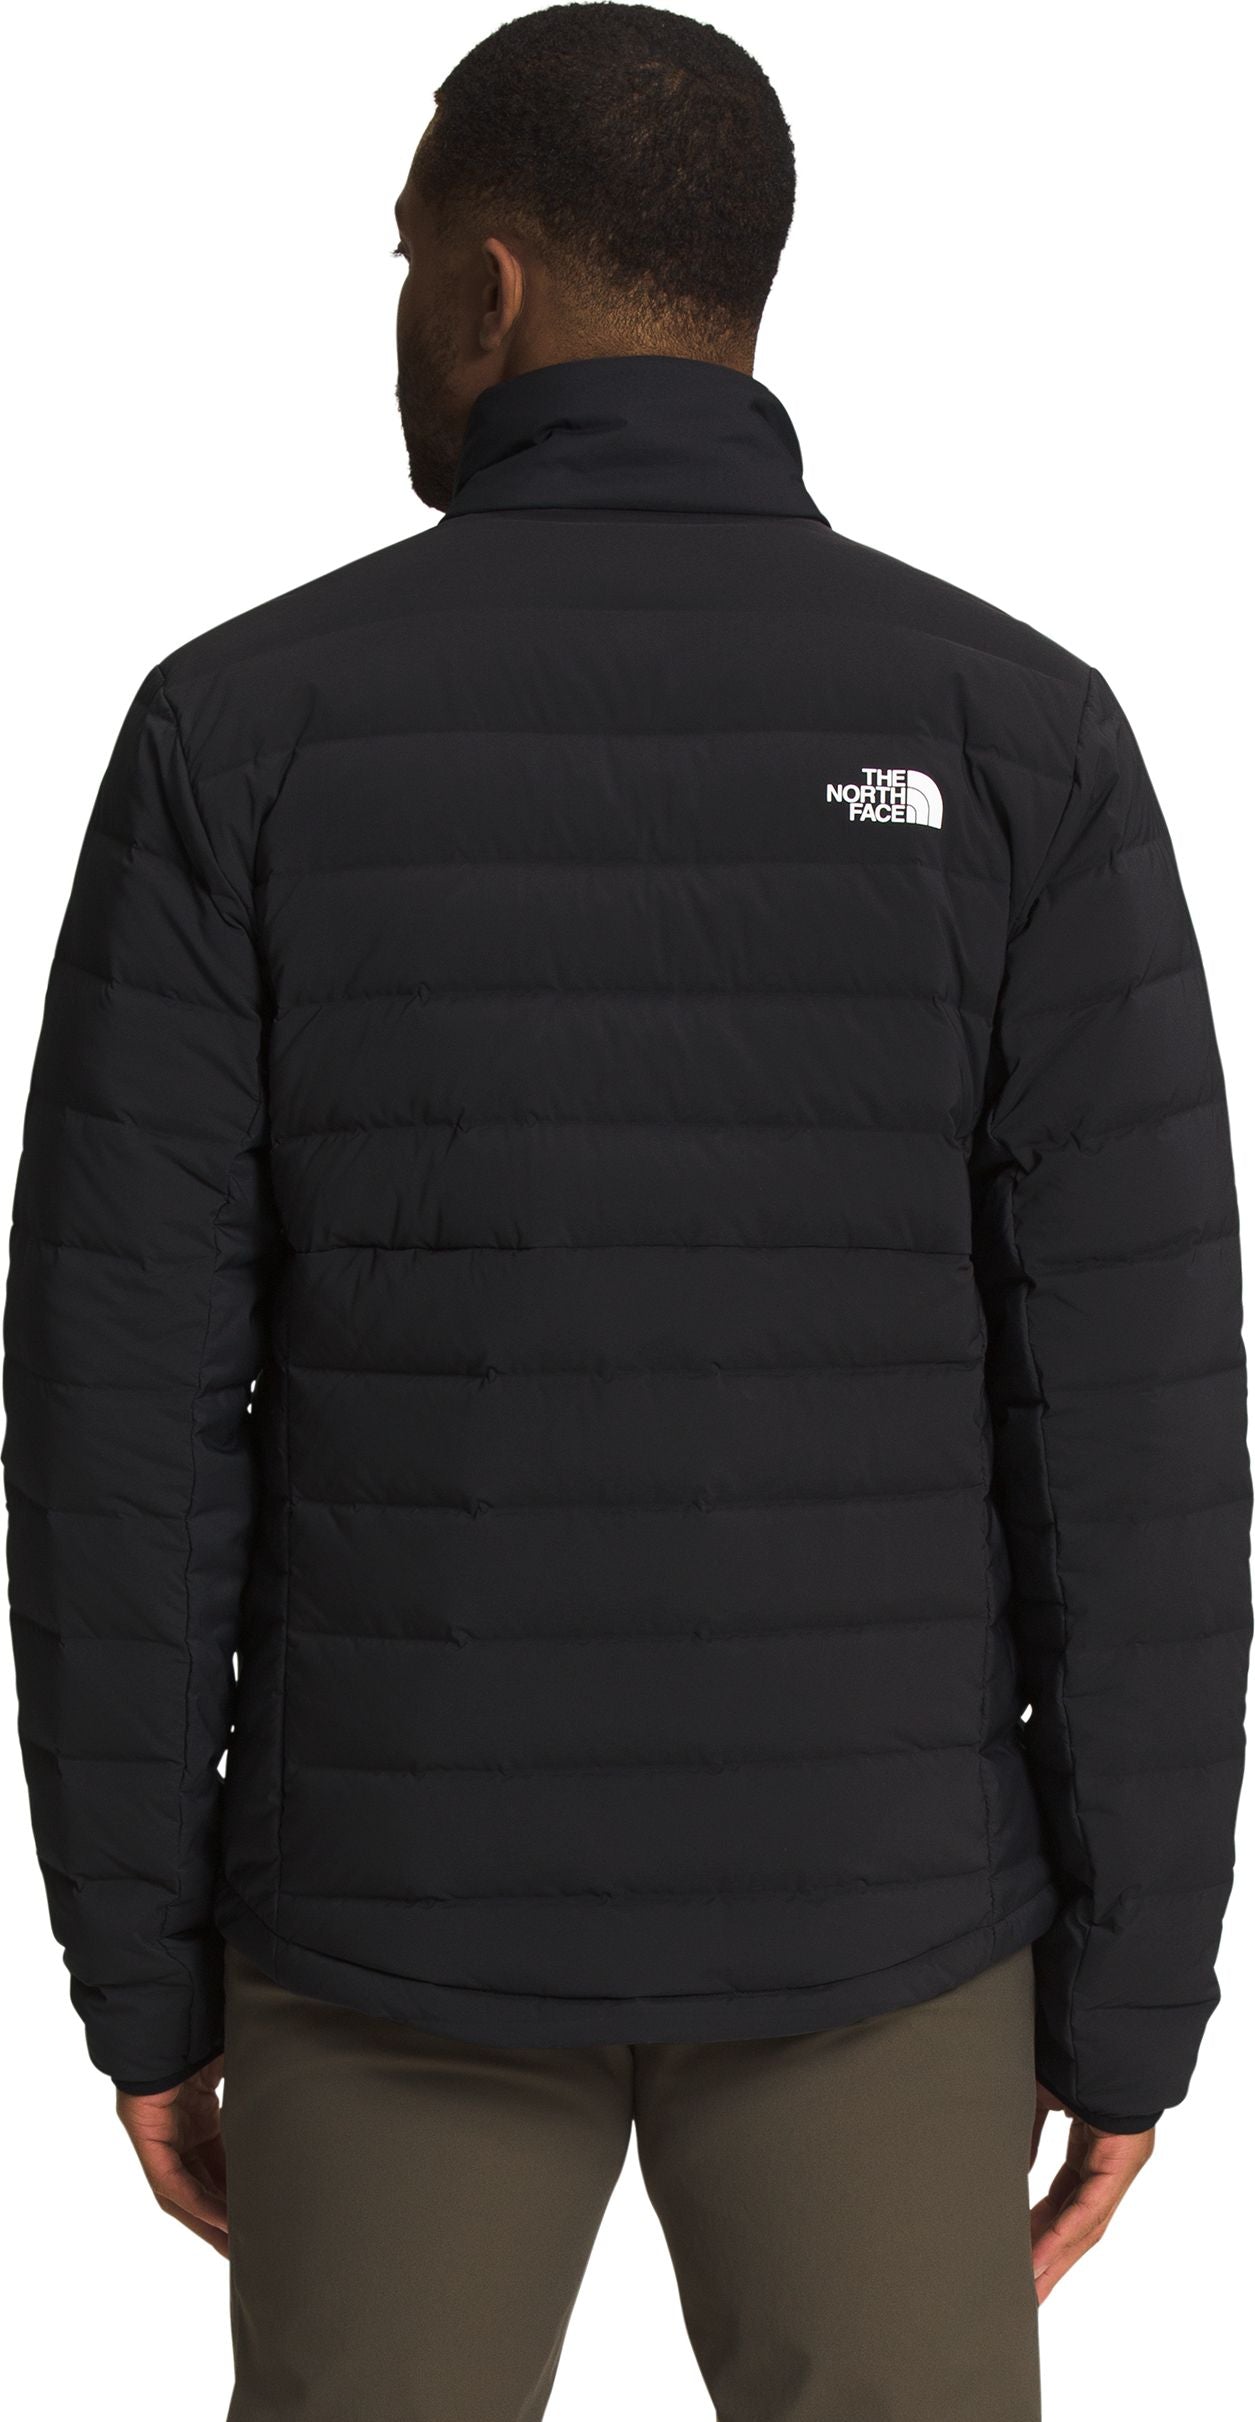 The North Face Apparel Men's Belleview Stretch Down Jacket Tnf Black